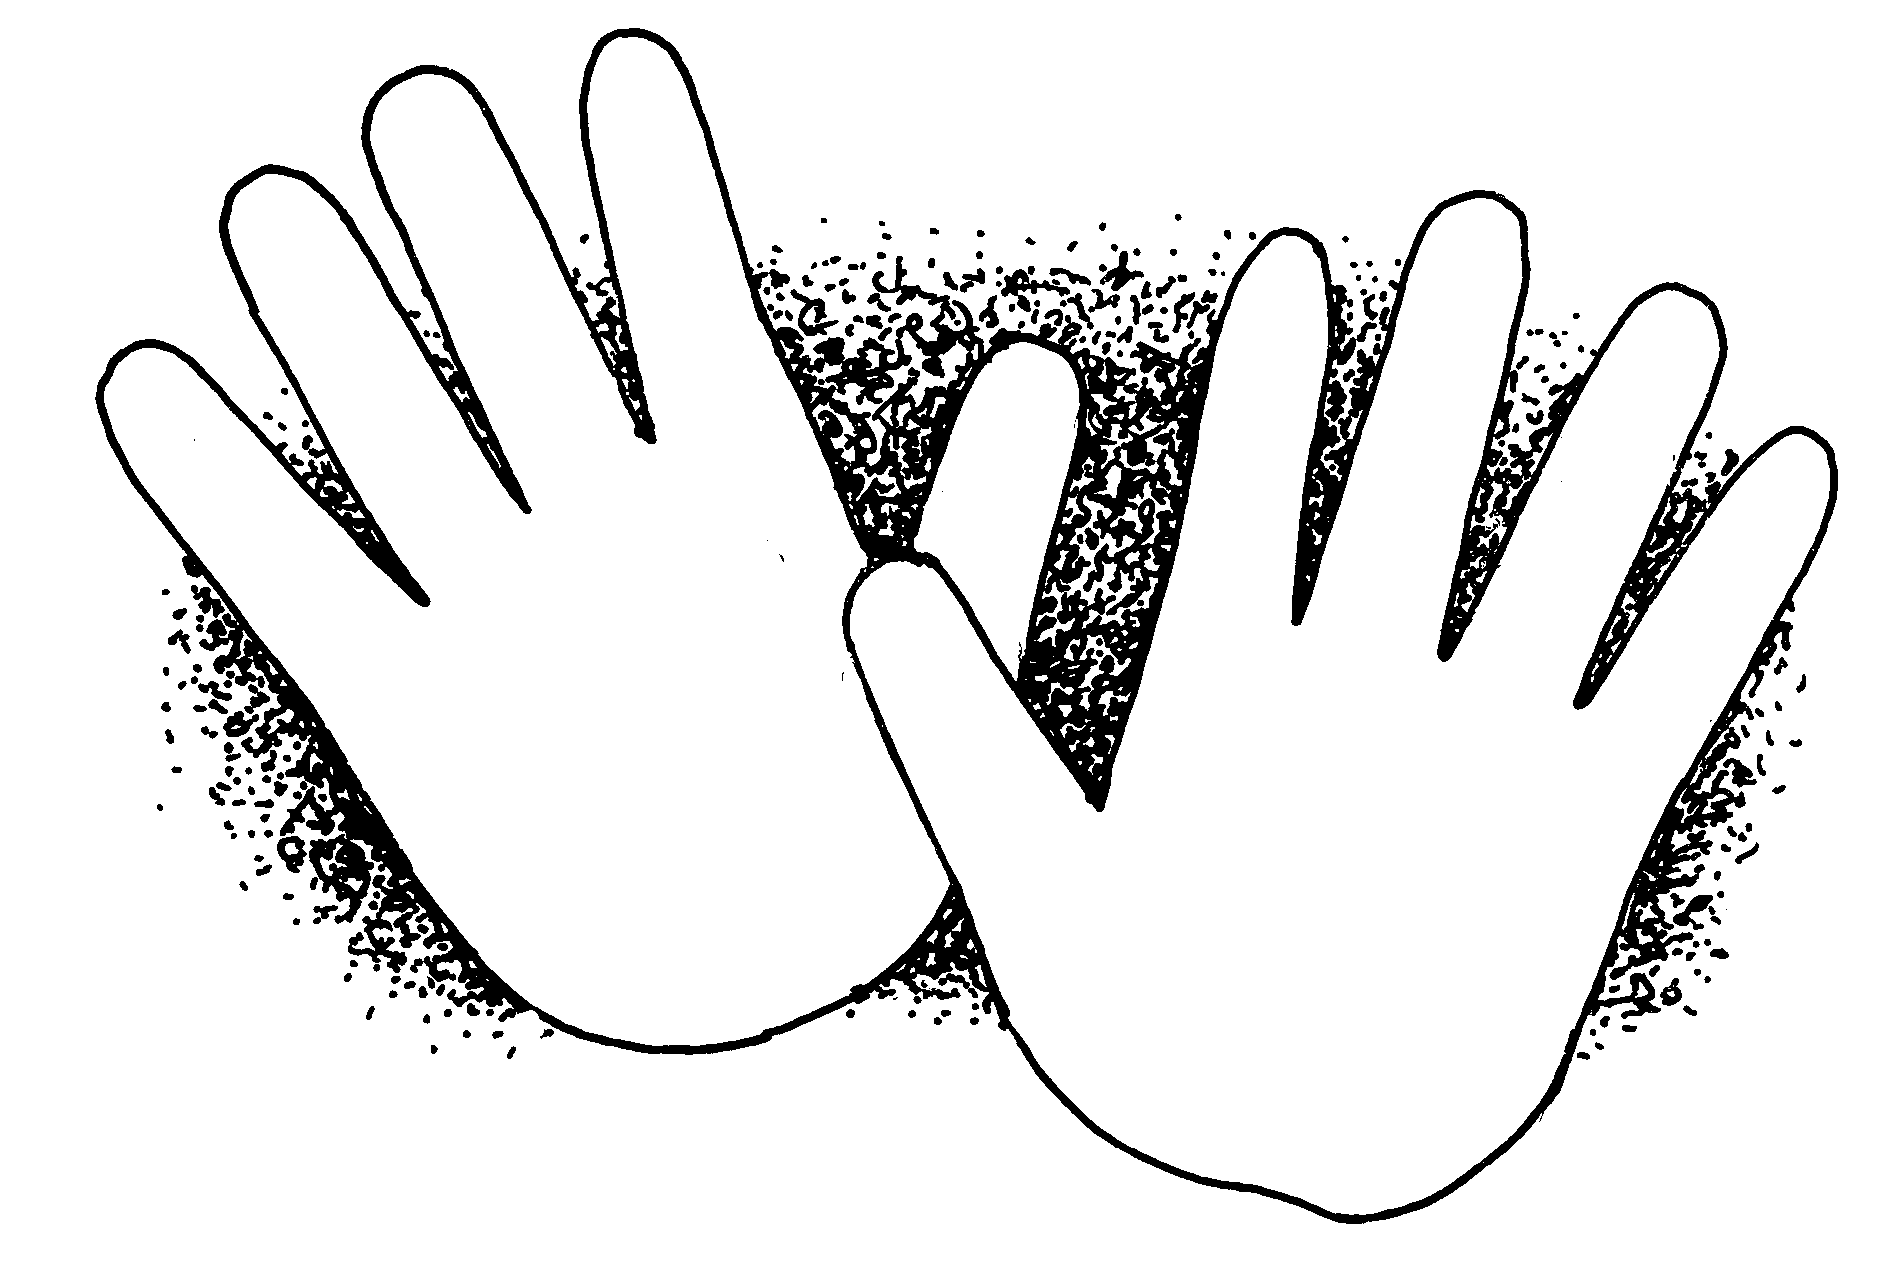 Free Printable Hands, Download Free Printable Hands png images, Free